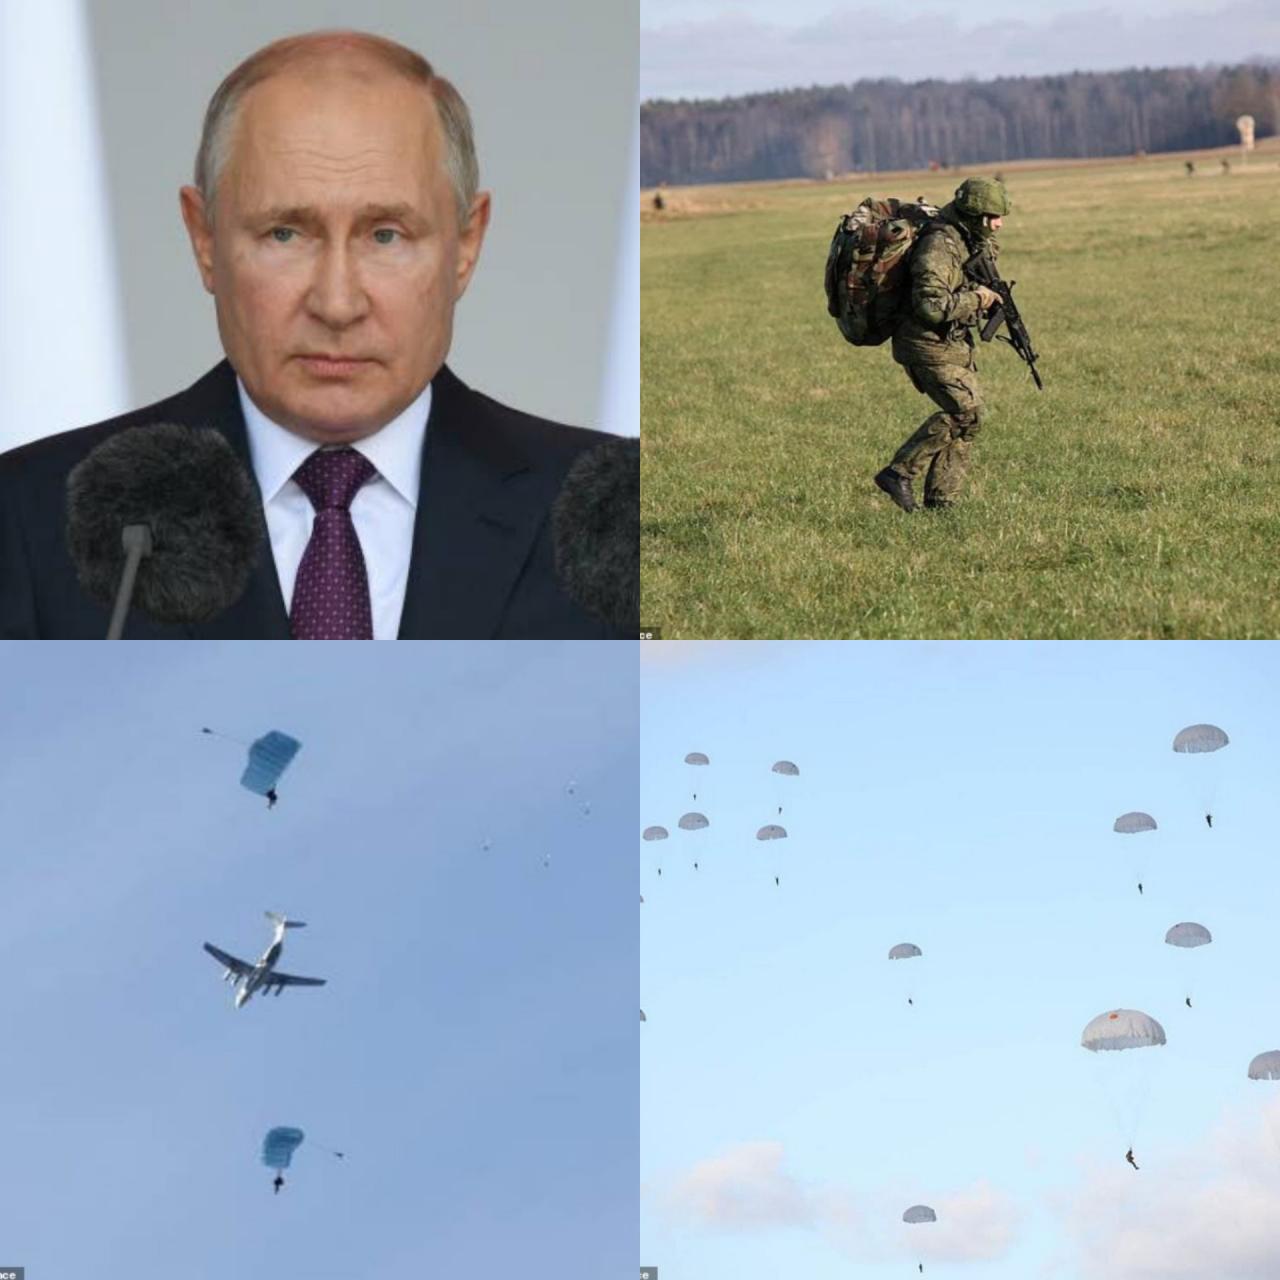 Russia and Belarus deploy soldiers close to Poland border as UK airforce intercepts Putin